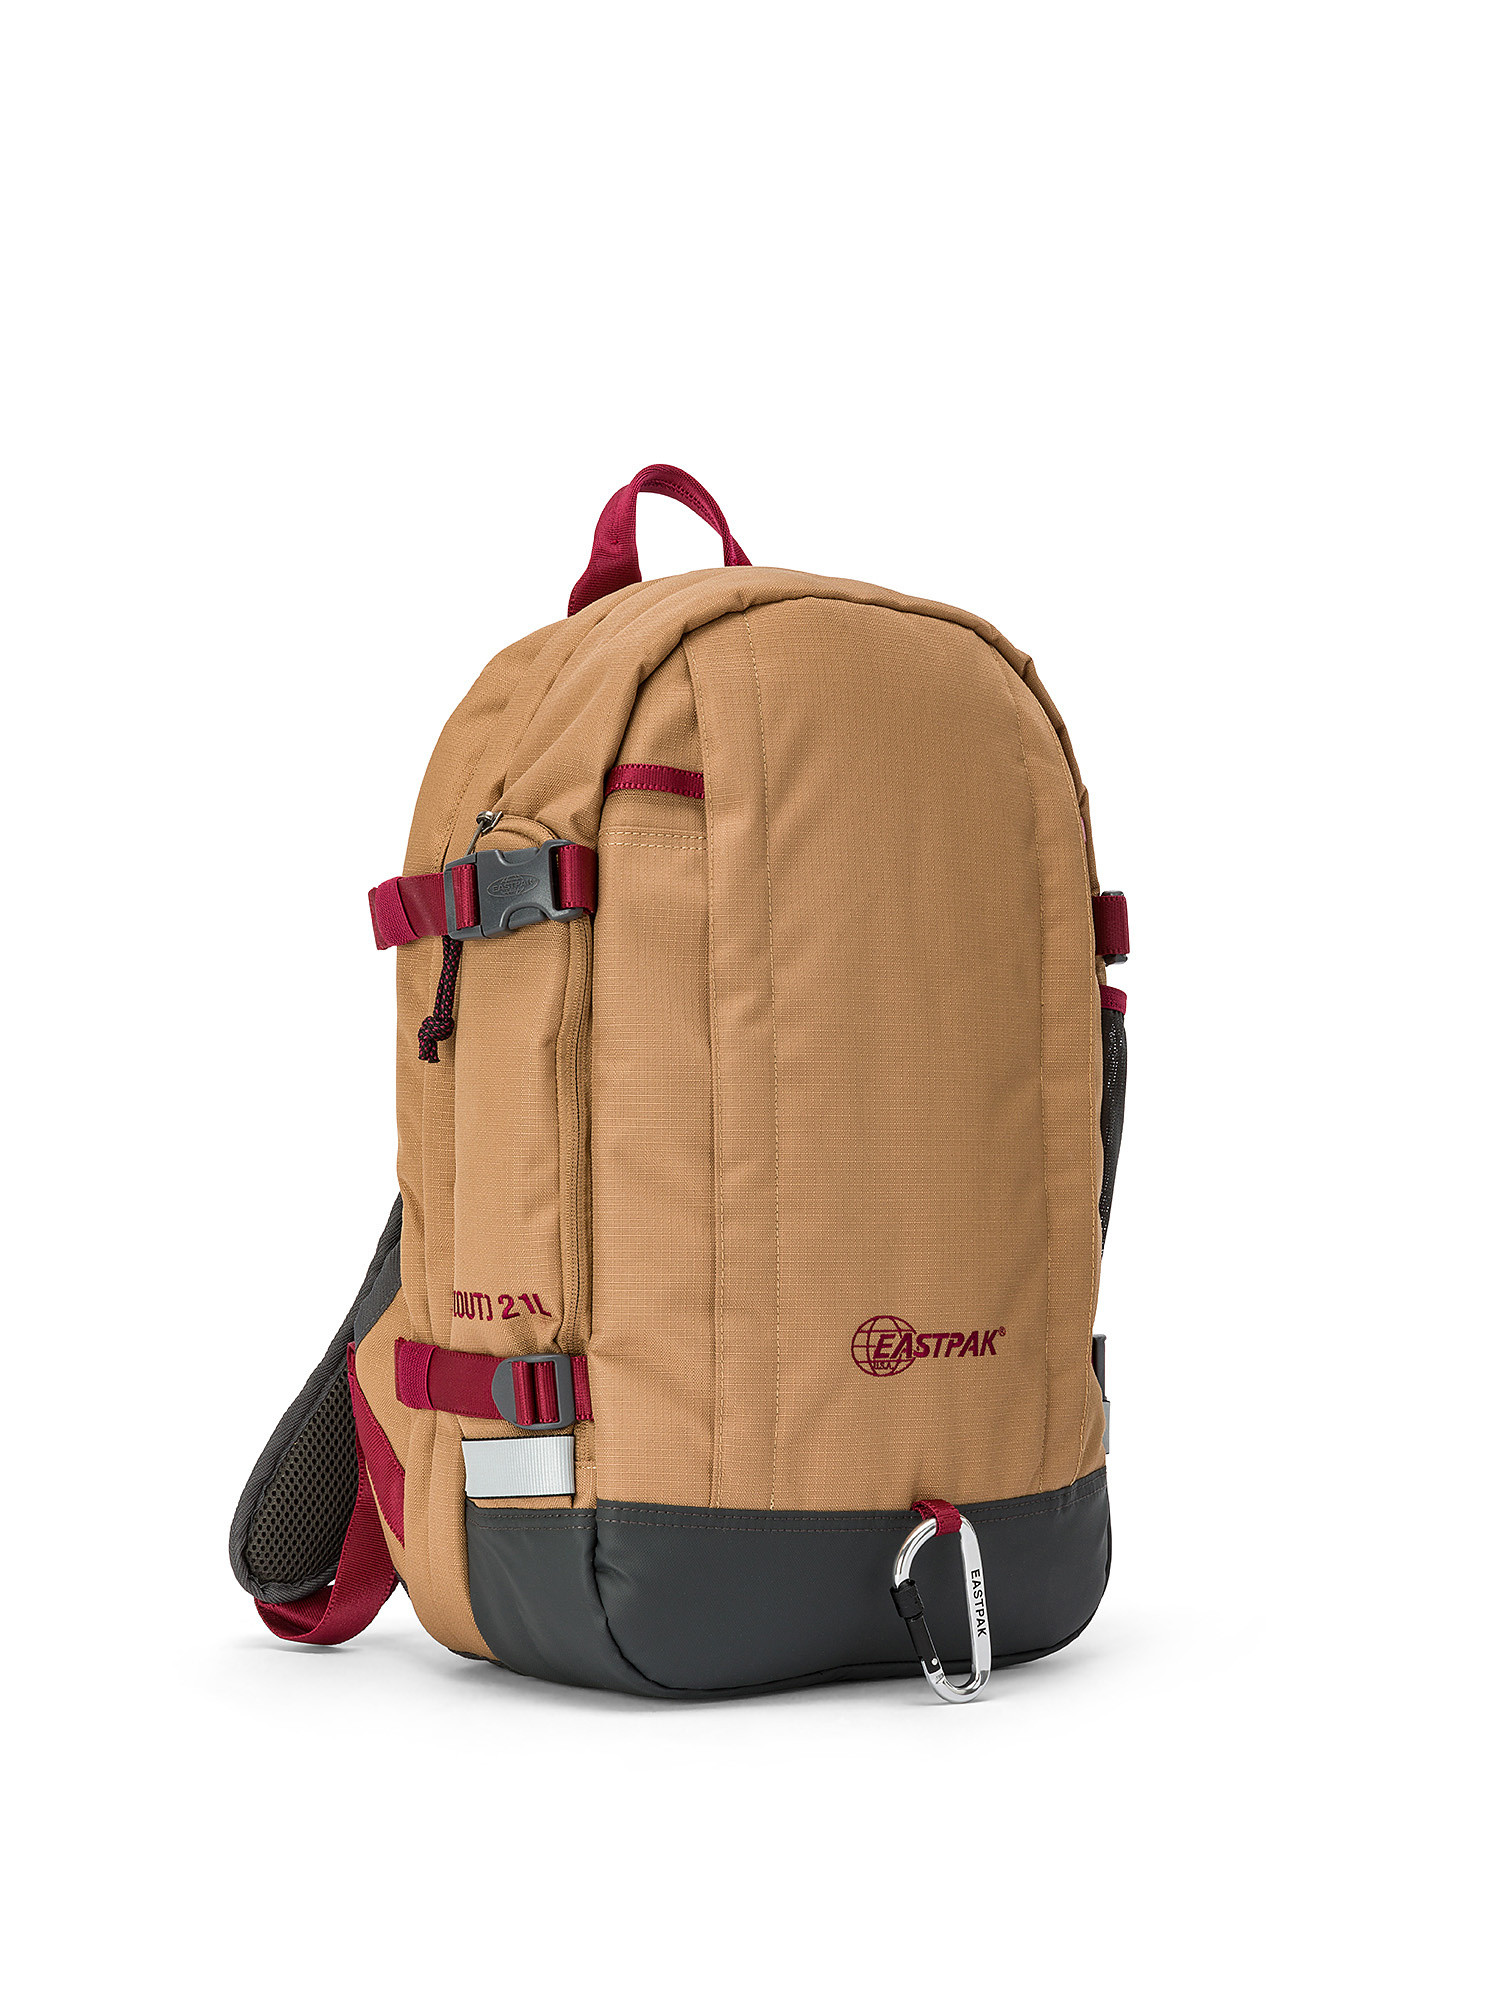 Eastpak - Zaino Out Safepack Out Brown, Marrone chiaro, large image number 1